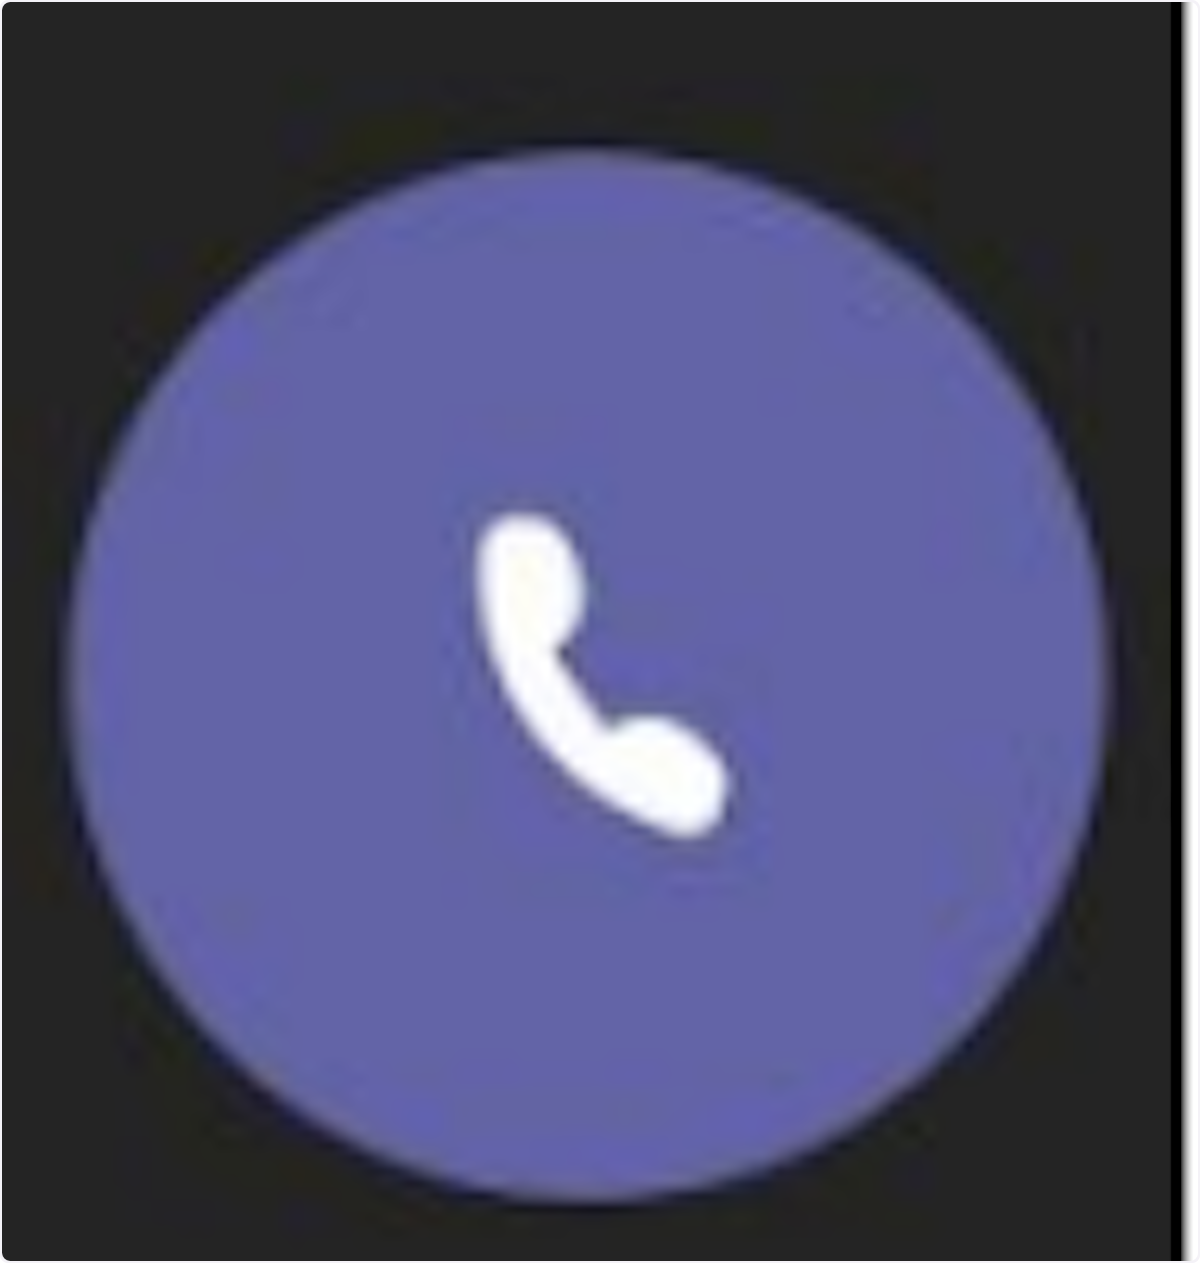 3. If currently on a call, push a button to place person on hold and answer new call.